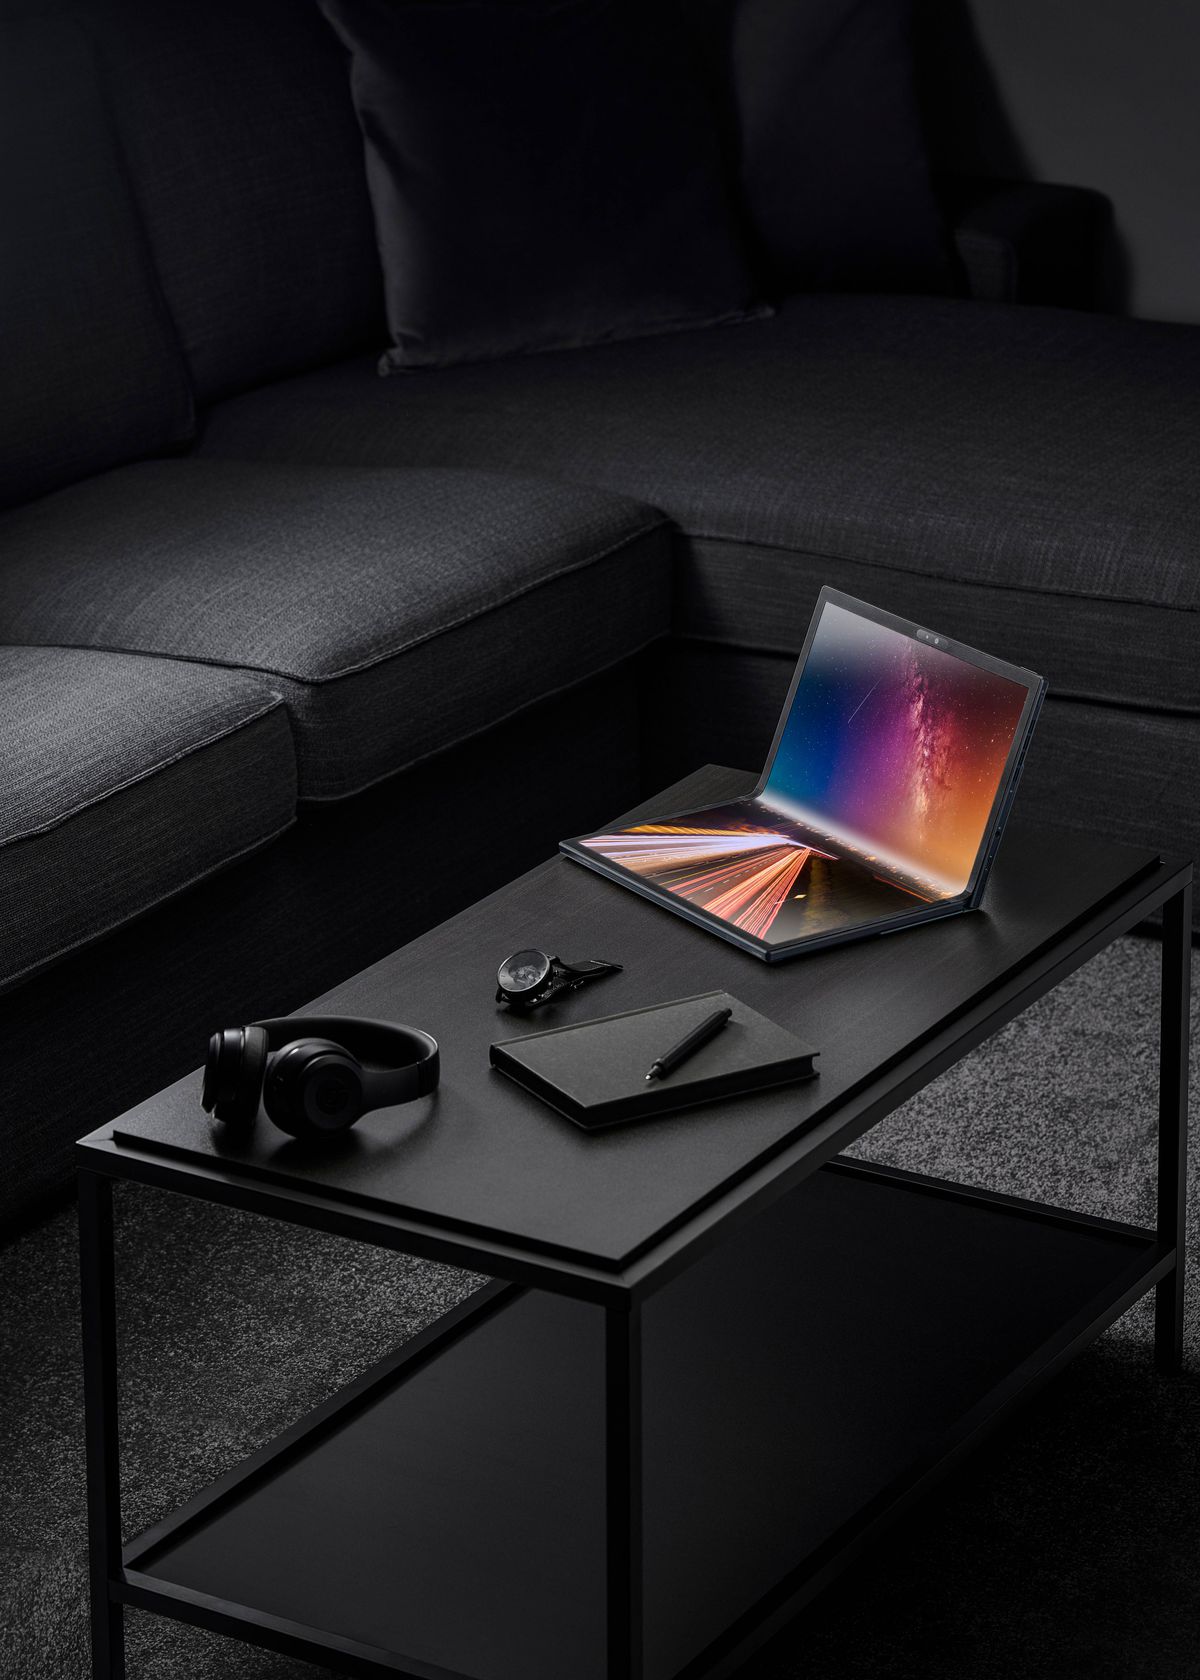 The Asus Zenbook 17 Fold OLED in clamshell mode on a black coffee table with a black couch behind it. Next to it are a black watch, a black pair of headphones, and a closed black notebook with a black pen atop. The screen displays a multicolor background.